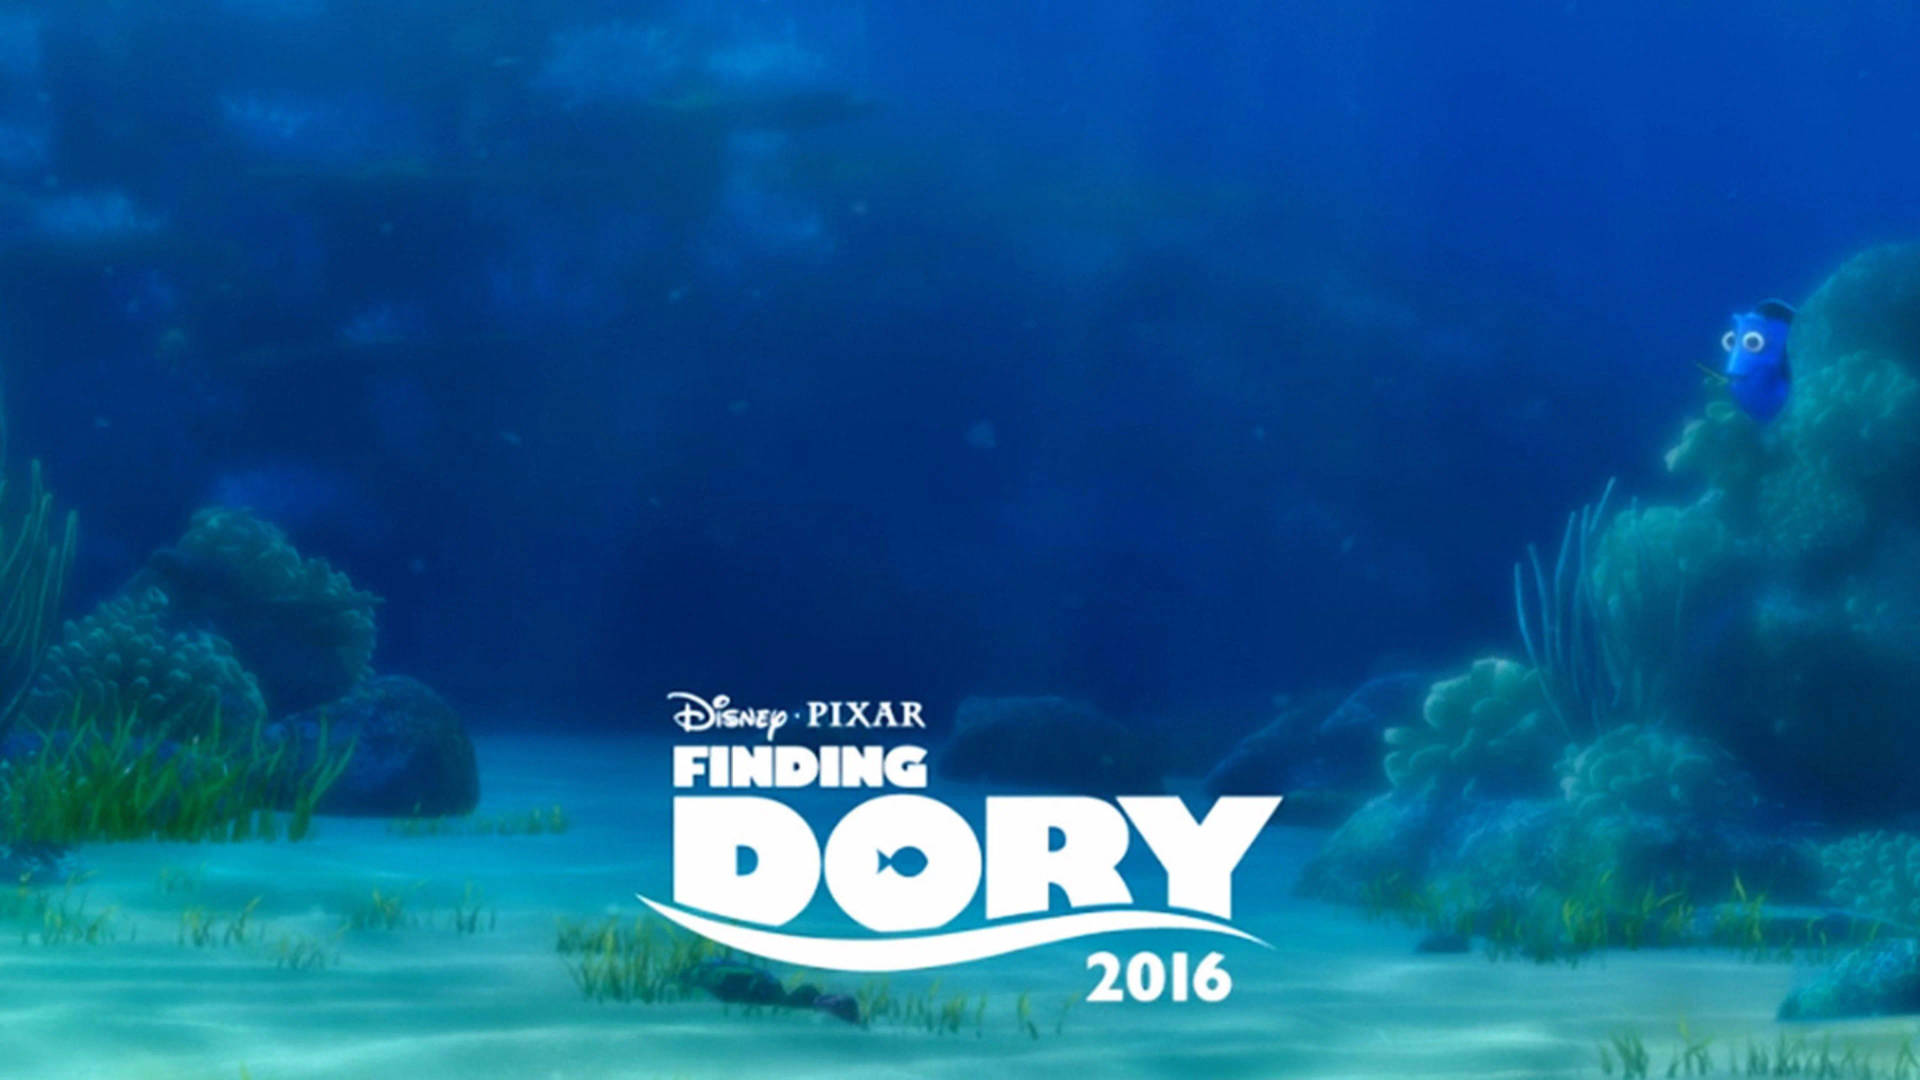 Finding Dory 2016 Movie Background